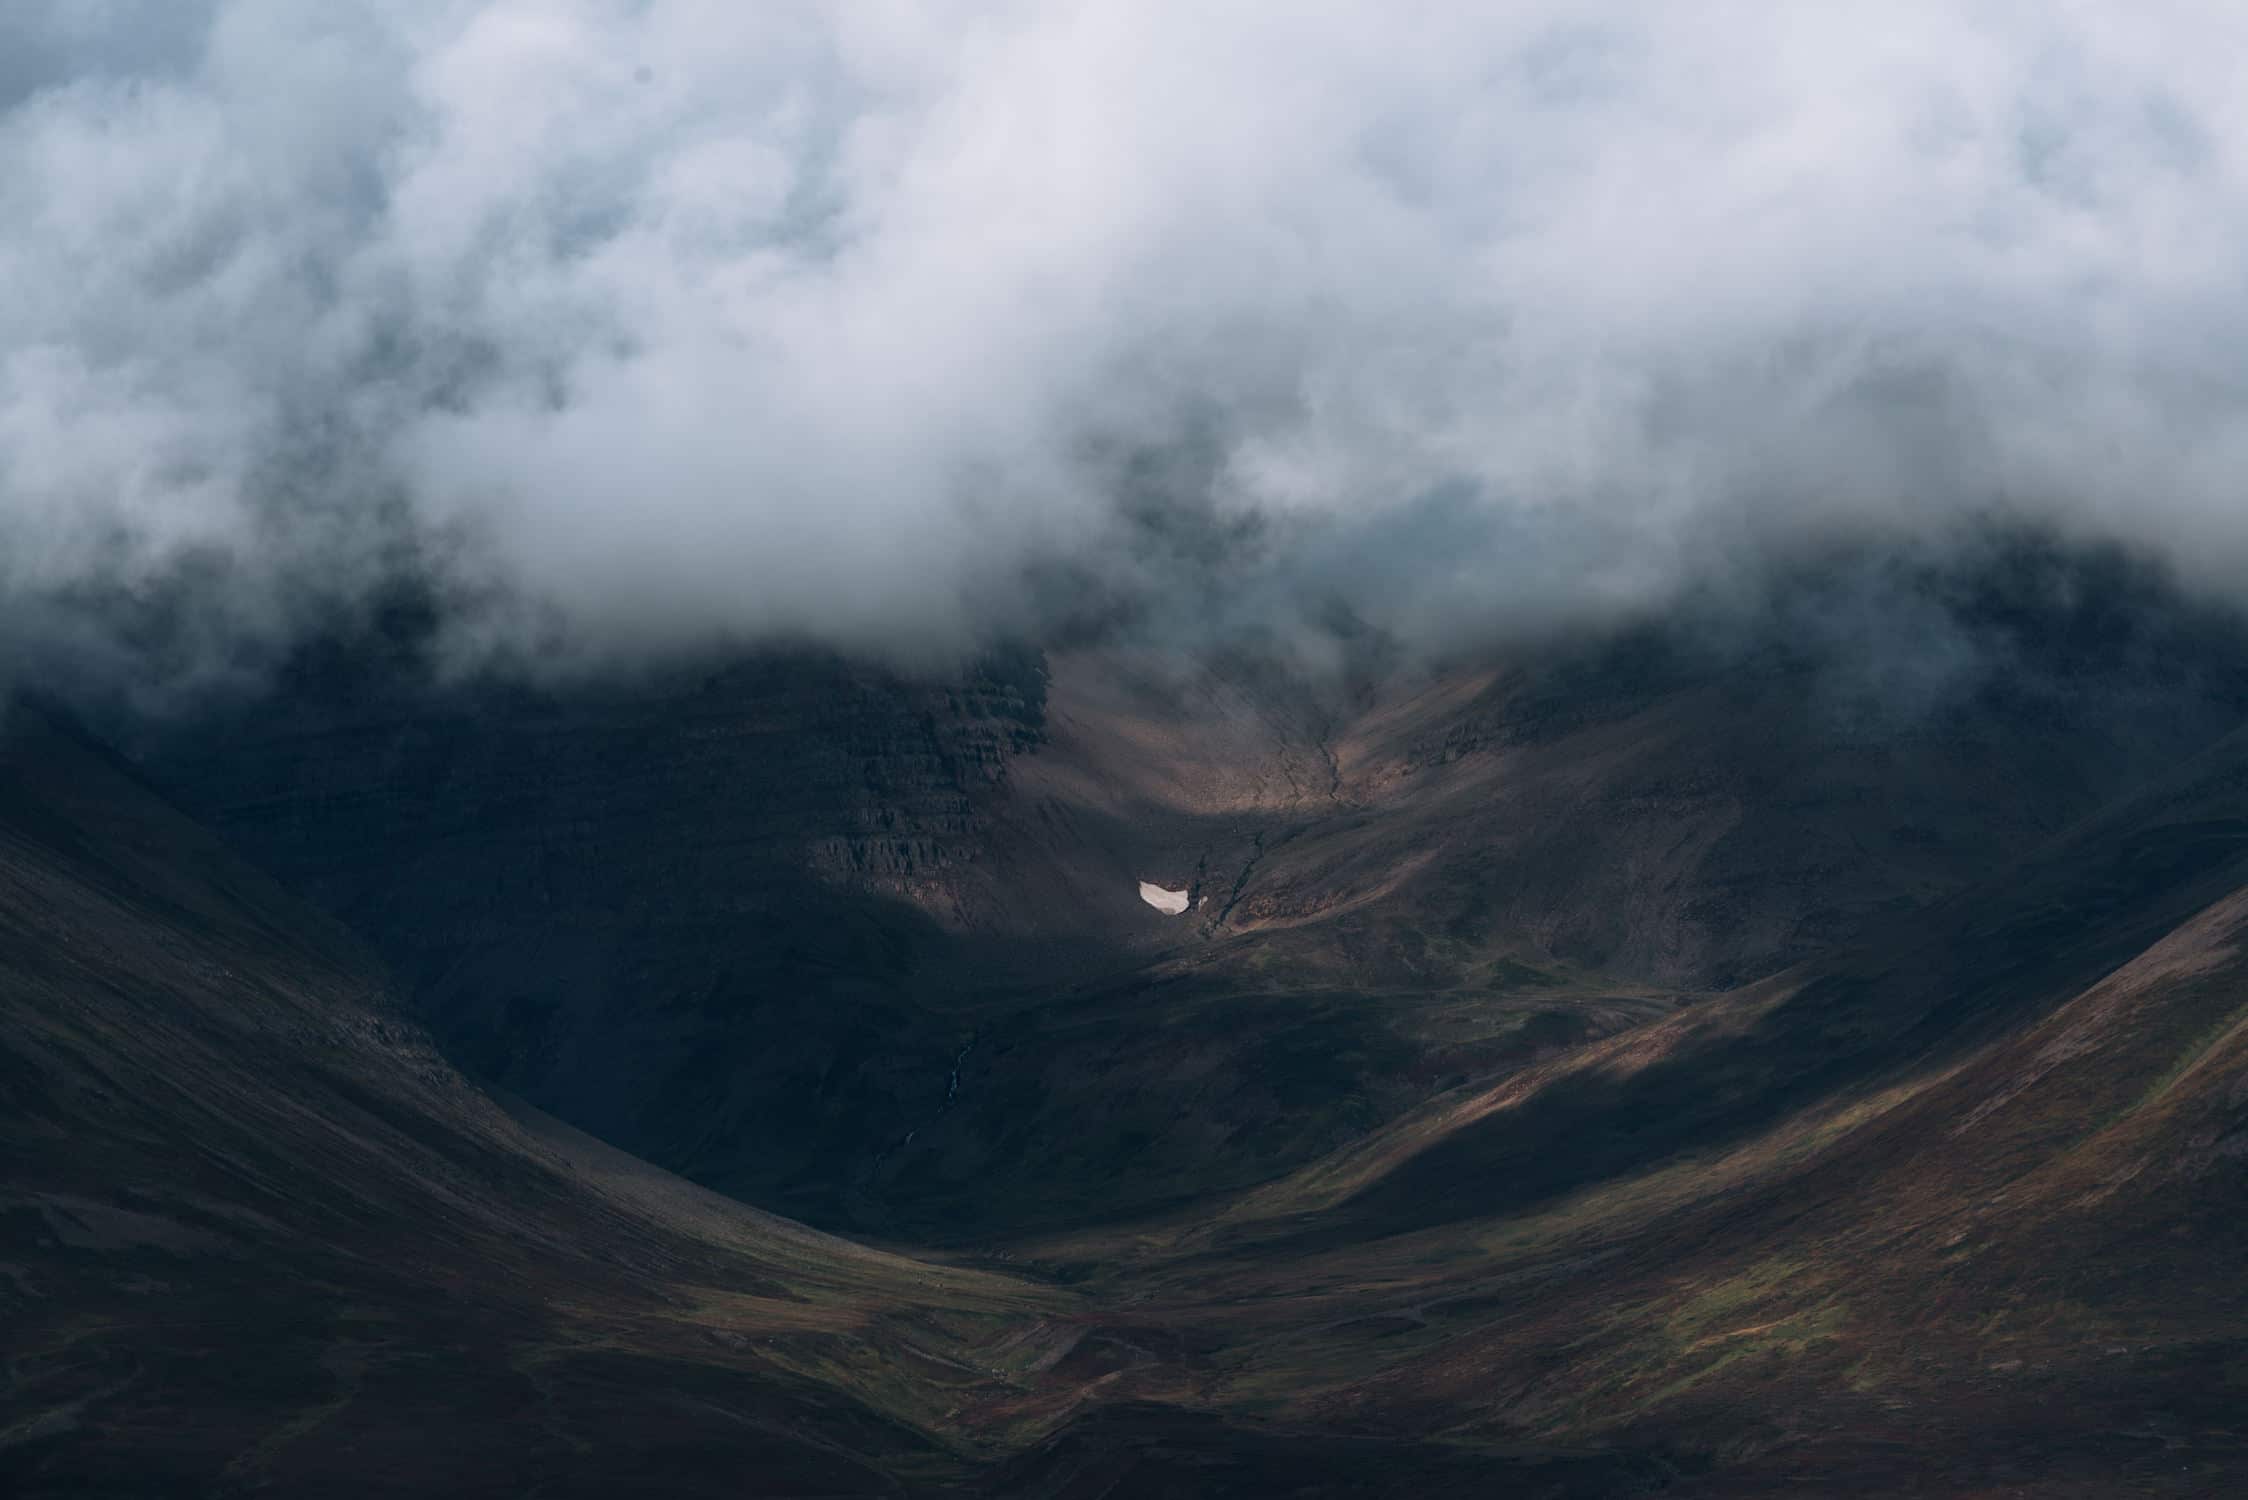 Abstract shapes and forms of water, rivers, glaciers and mountains in the moody Icelandic landscape captured by fine art photographer Michael Schauer